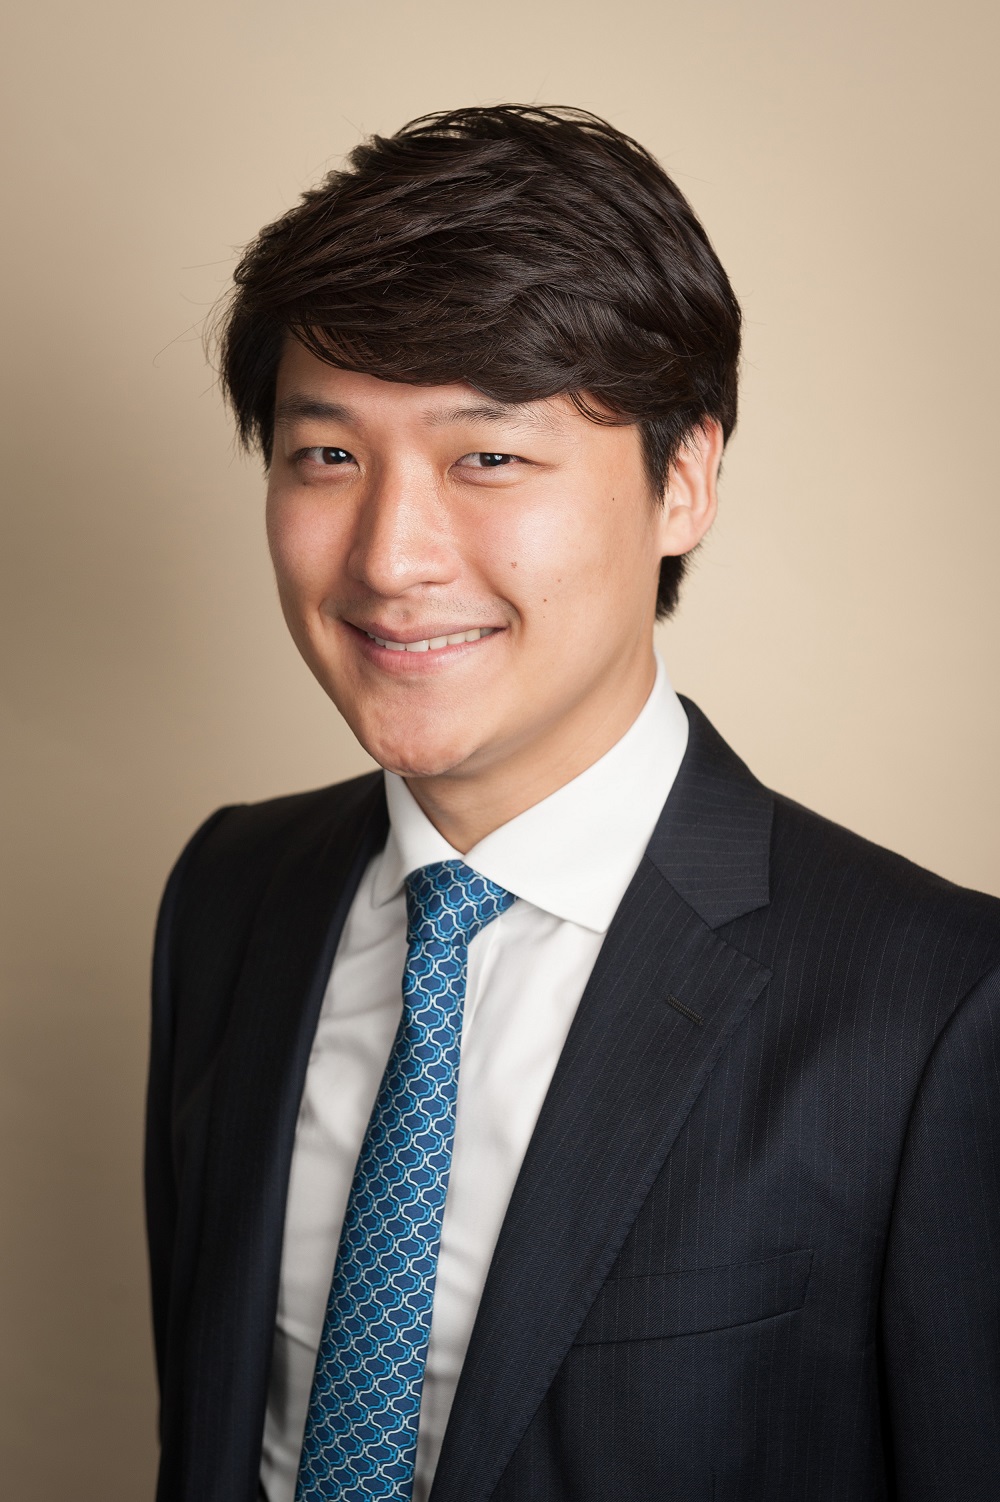 Jeik Sohn is investment director for Asia at M&G Investments